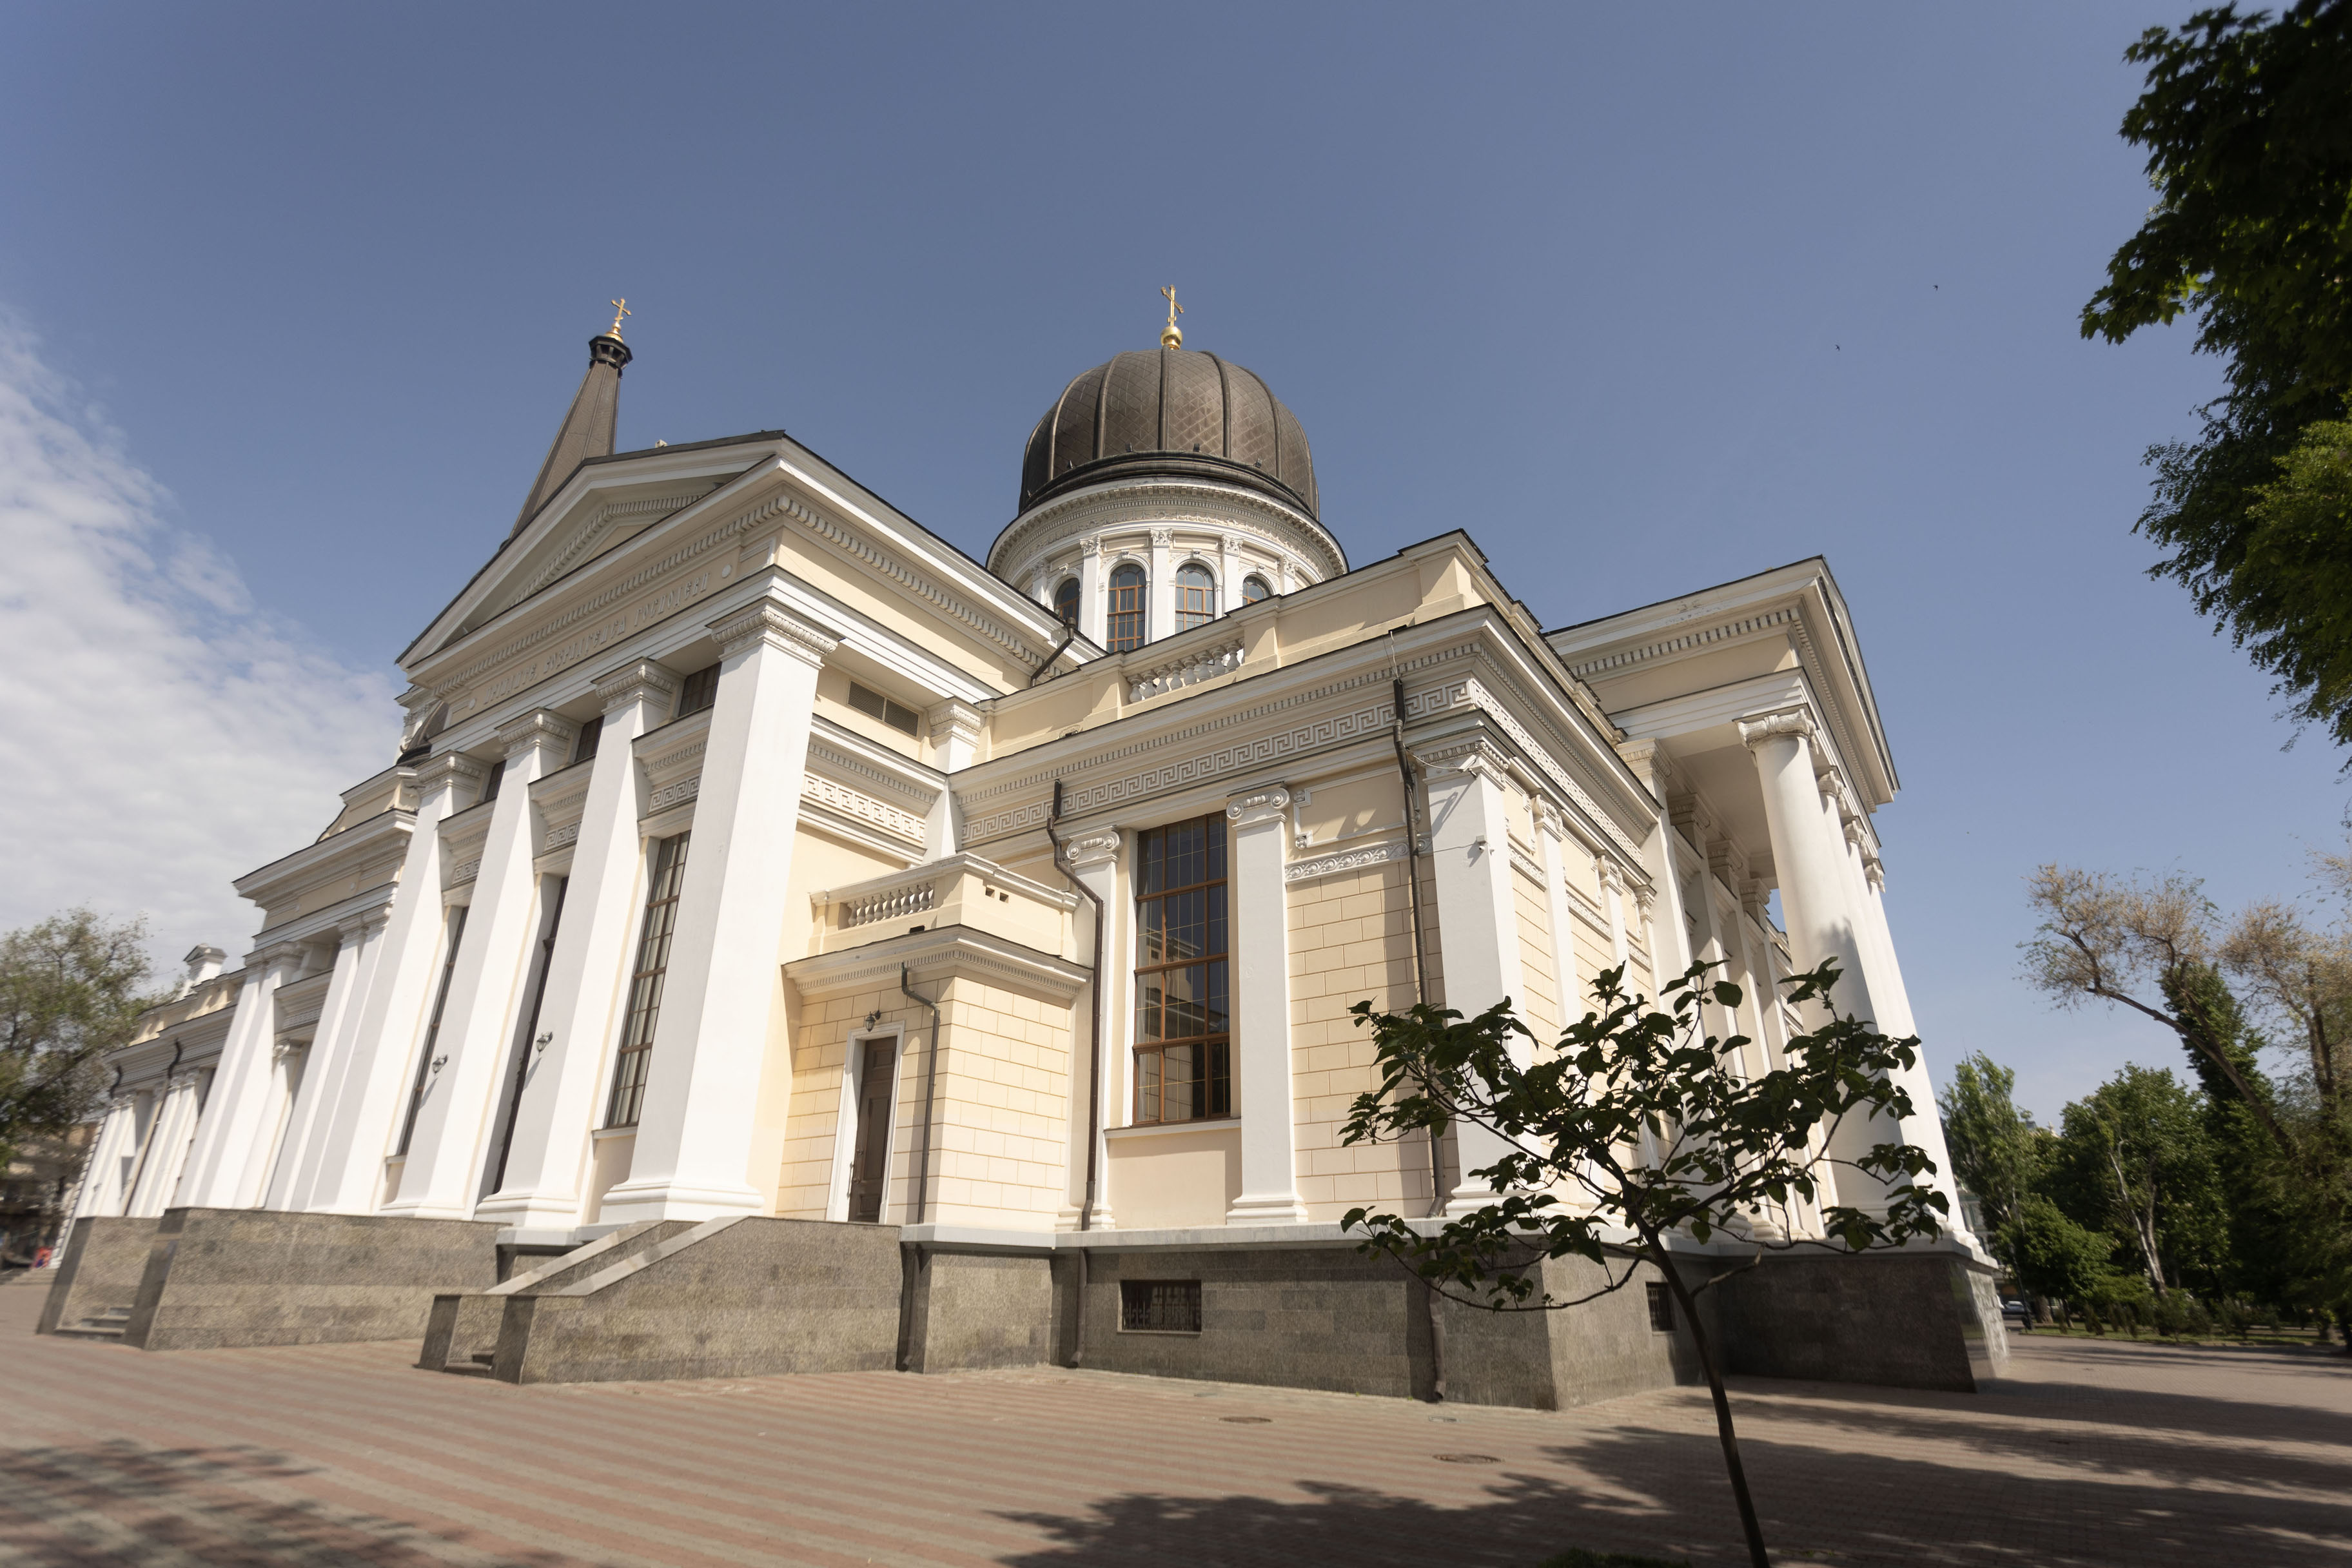 Picture of The Orthodox Transfiguration Cathedral of Odesa on Cathedral Square - Ukraine - Europe